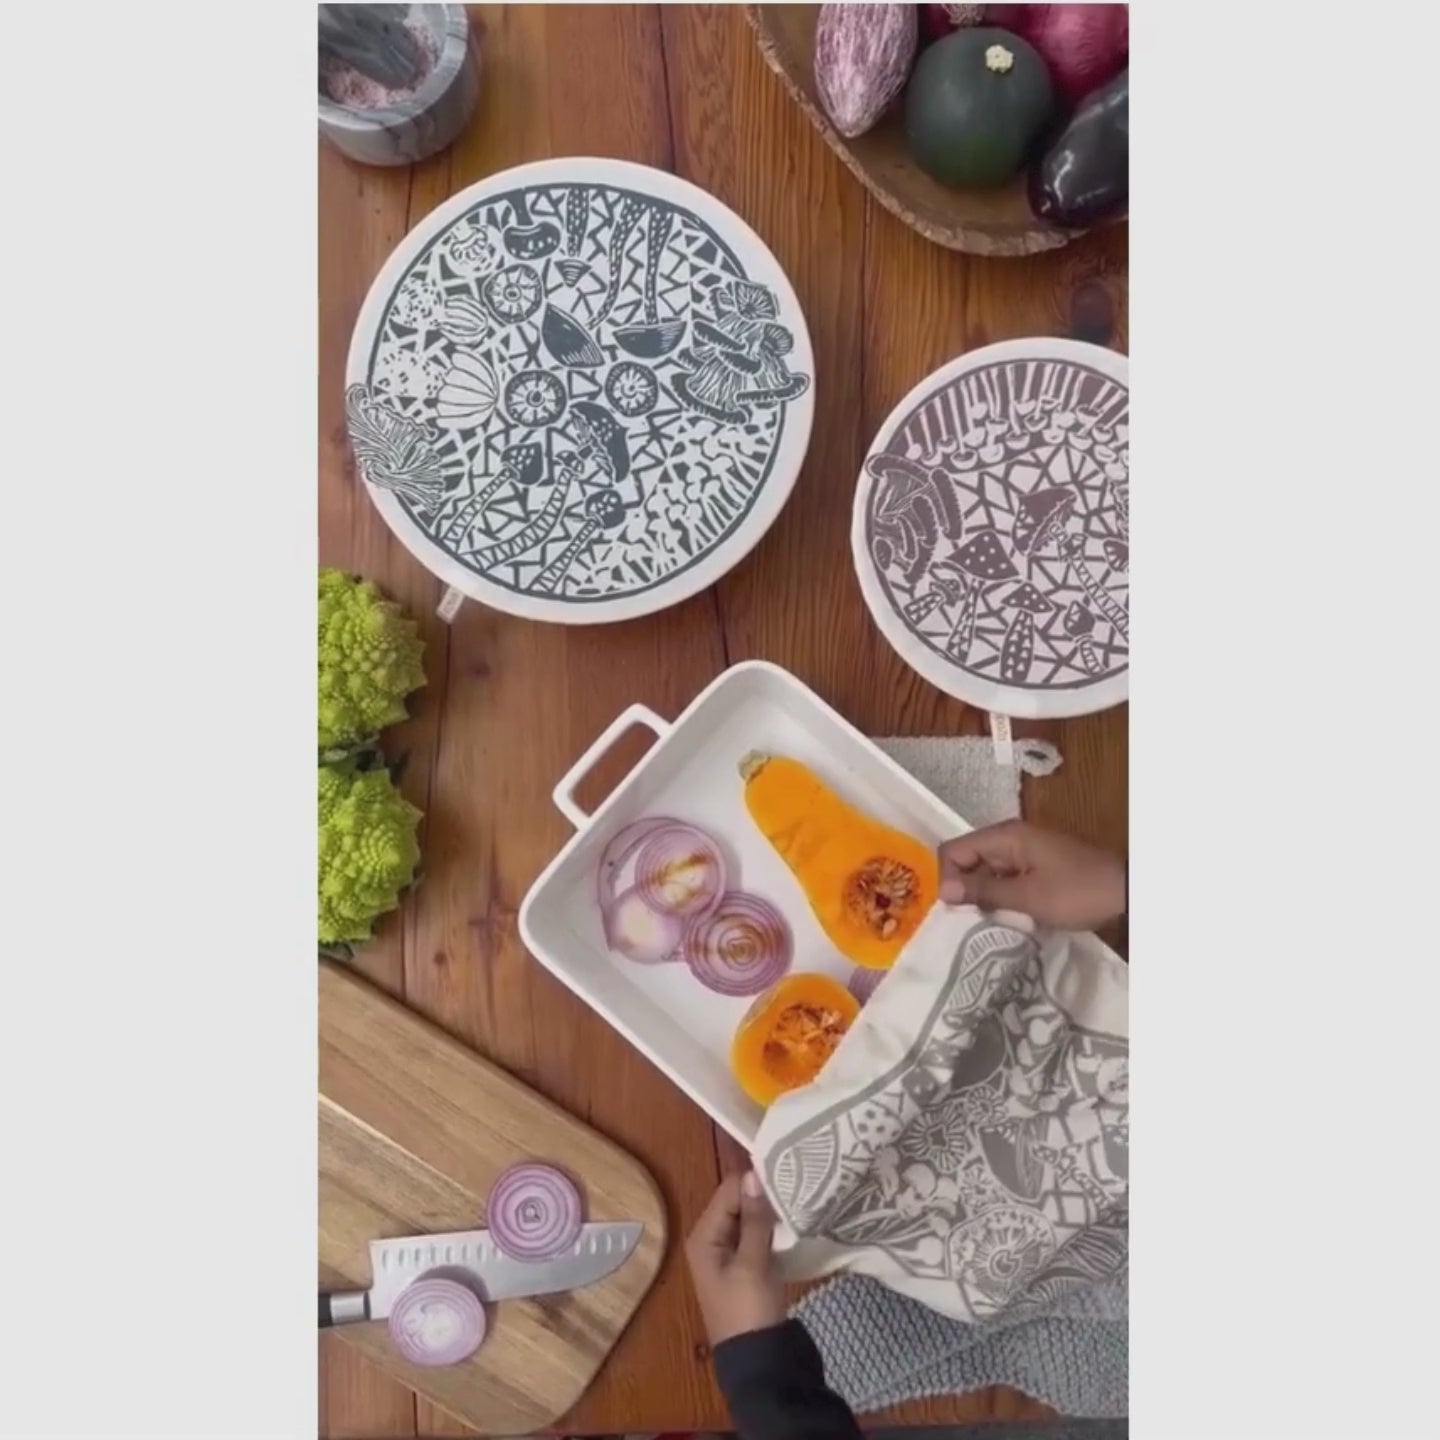 Video showing how to use Organic Cotton Dish Cover set, Made in South Africa. Fair Trade Halo Dish Covers. MUSHROOM print